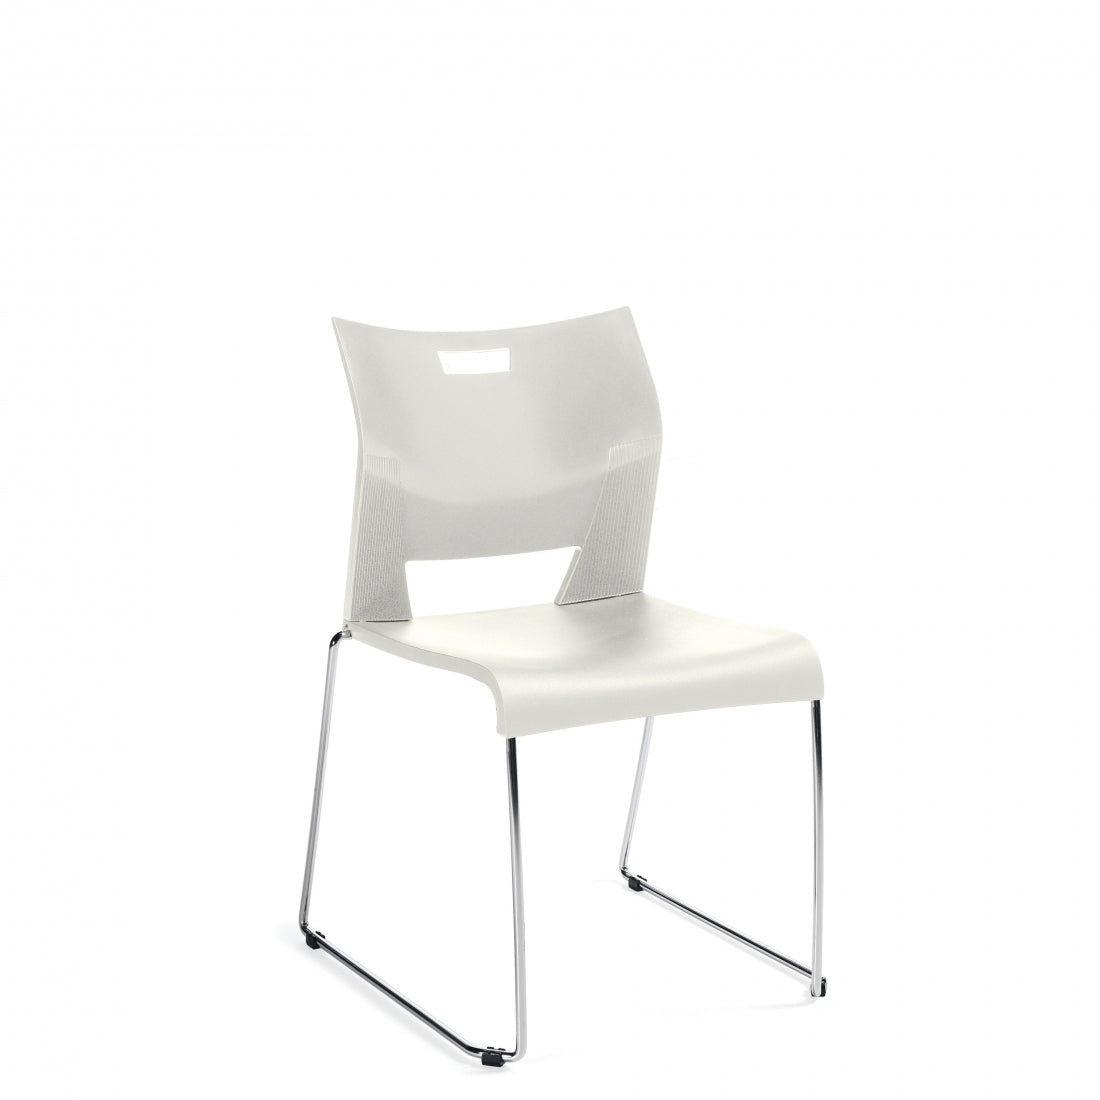 Global Duet 6621 Armless Polypropylene Seat & Back Guest Chair, Ivory Cloud Seating-Guest Chair - Office Ready